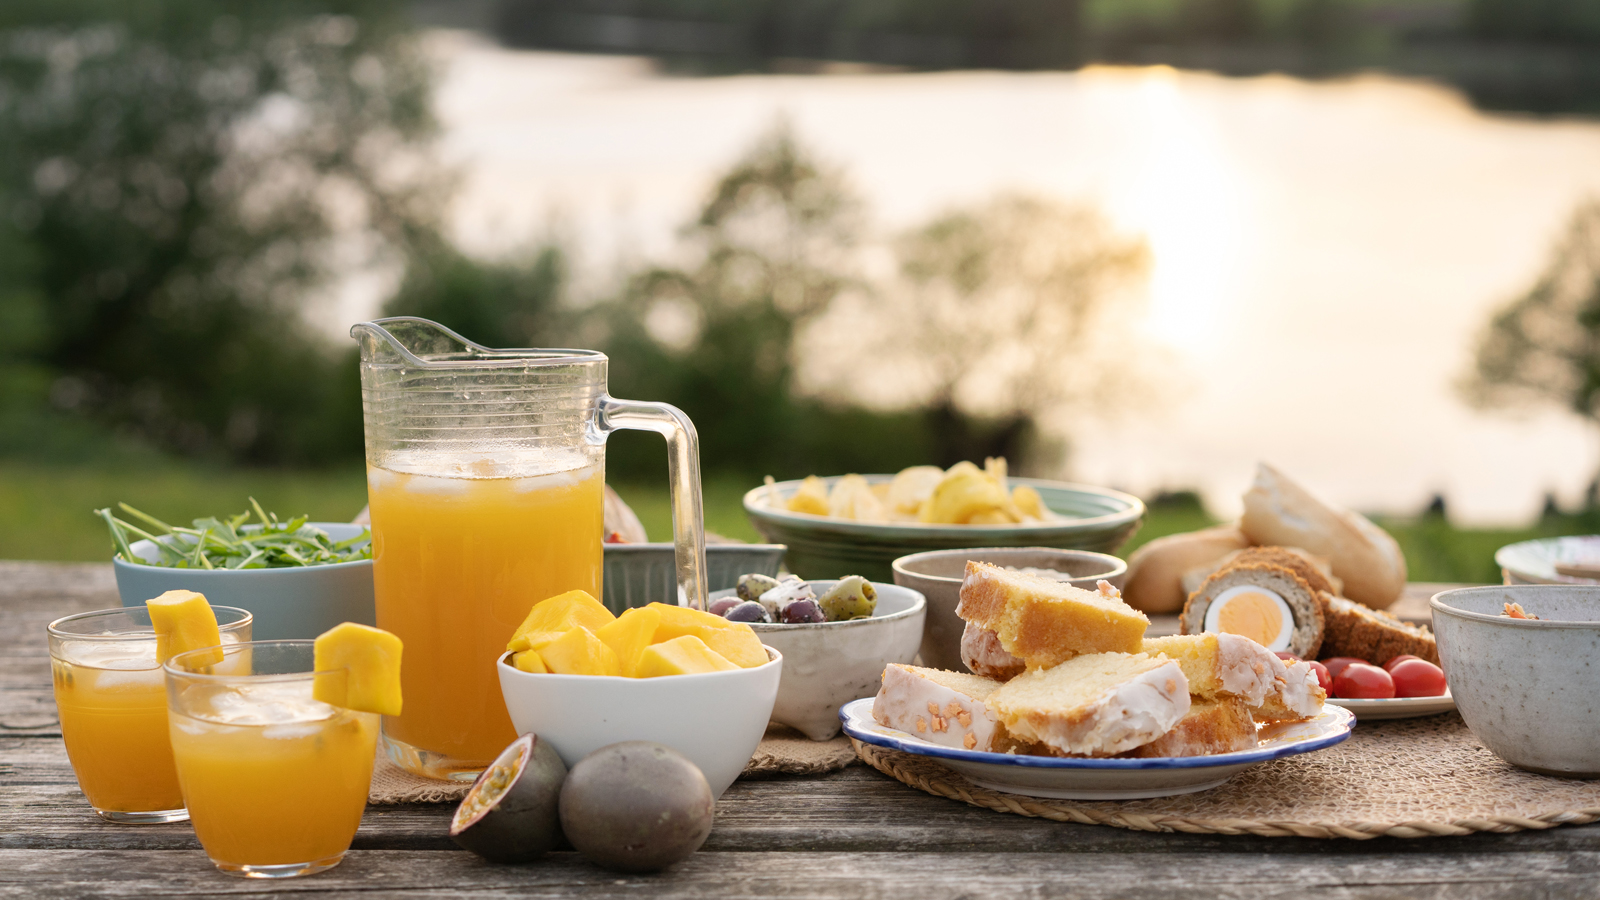 fresh fruit juice and picnic food on a picnic table with a lake behind